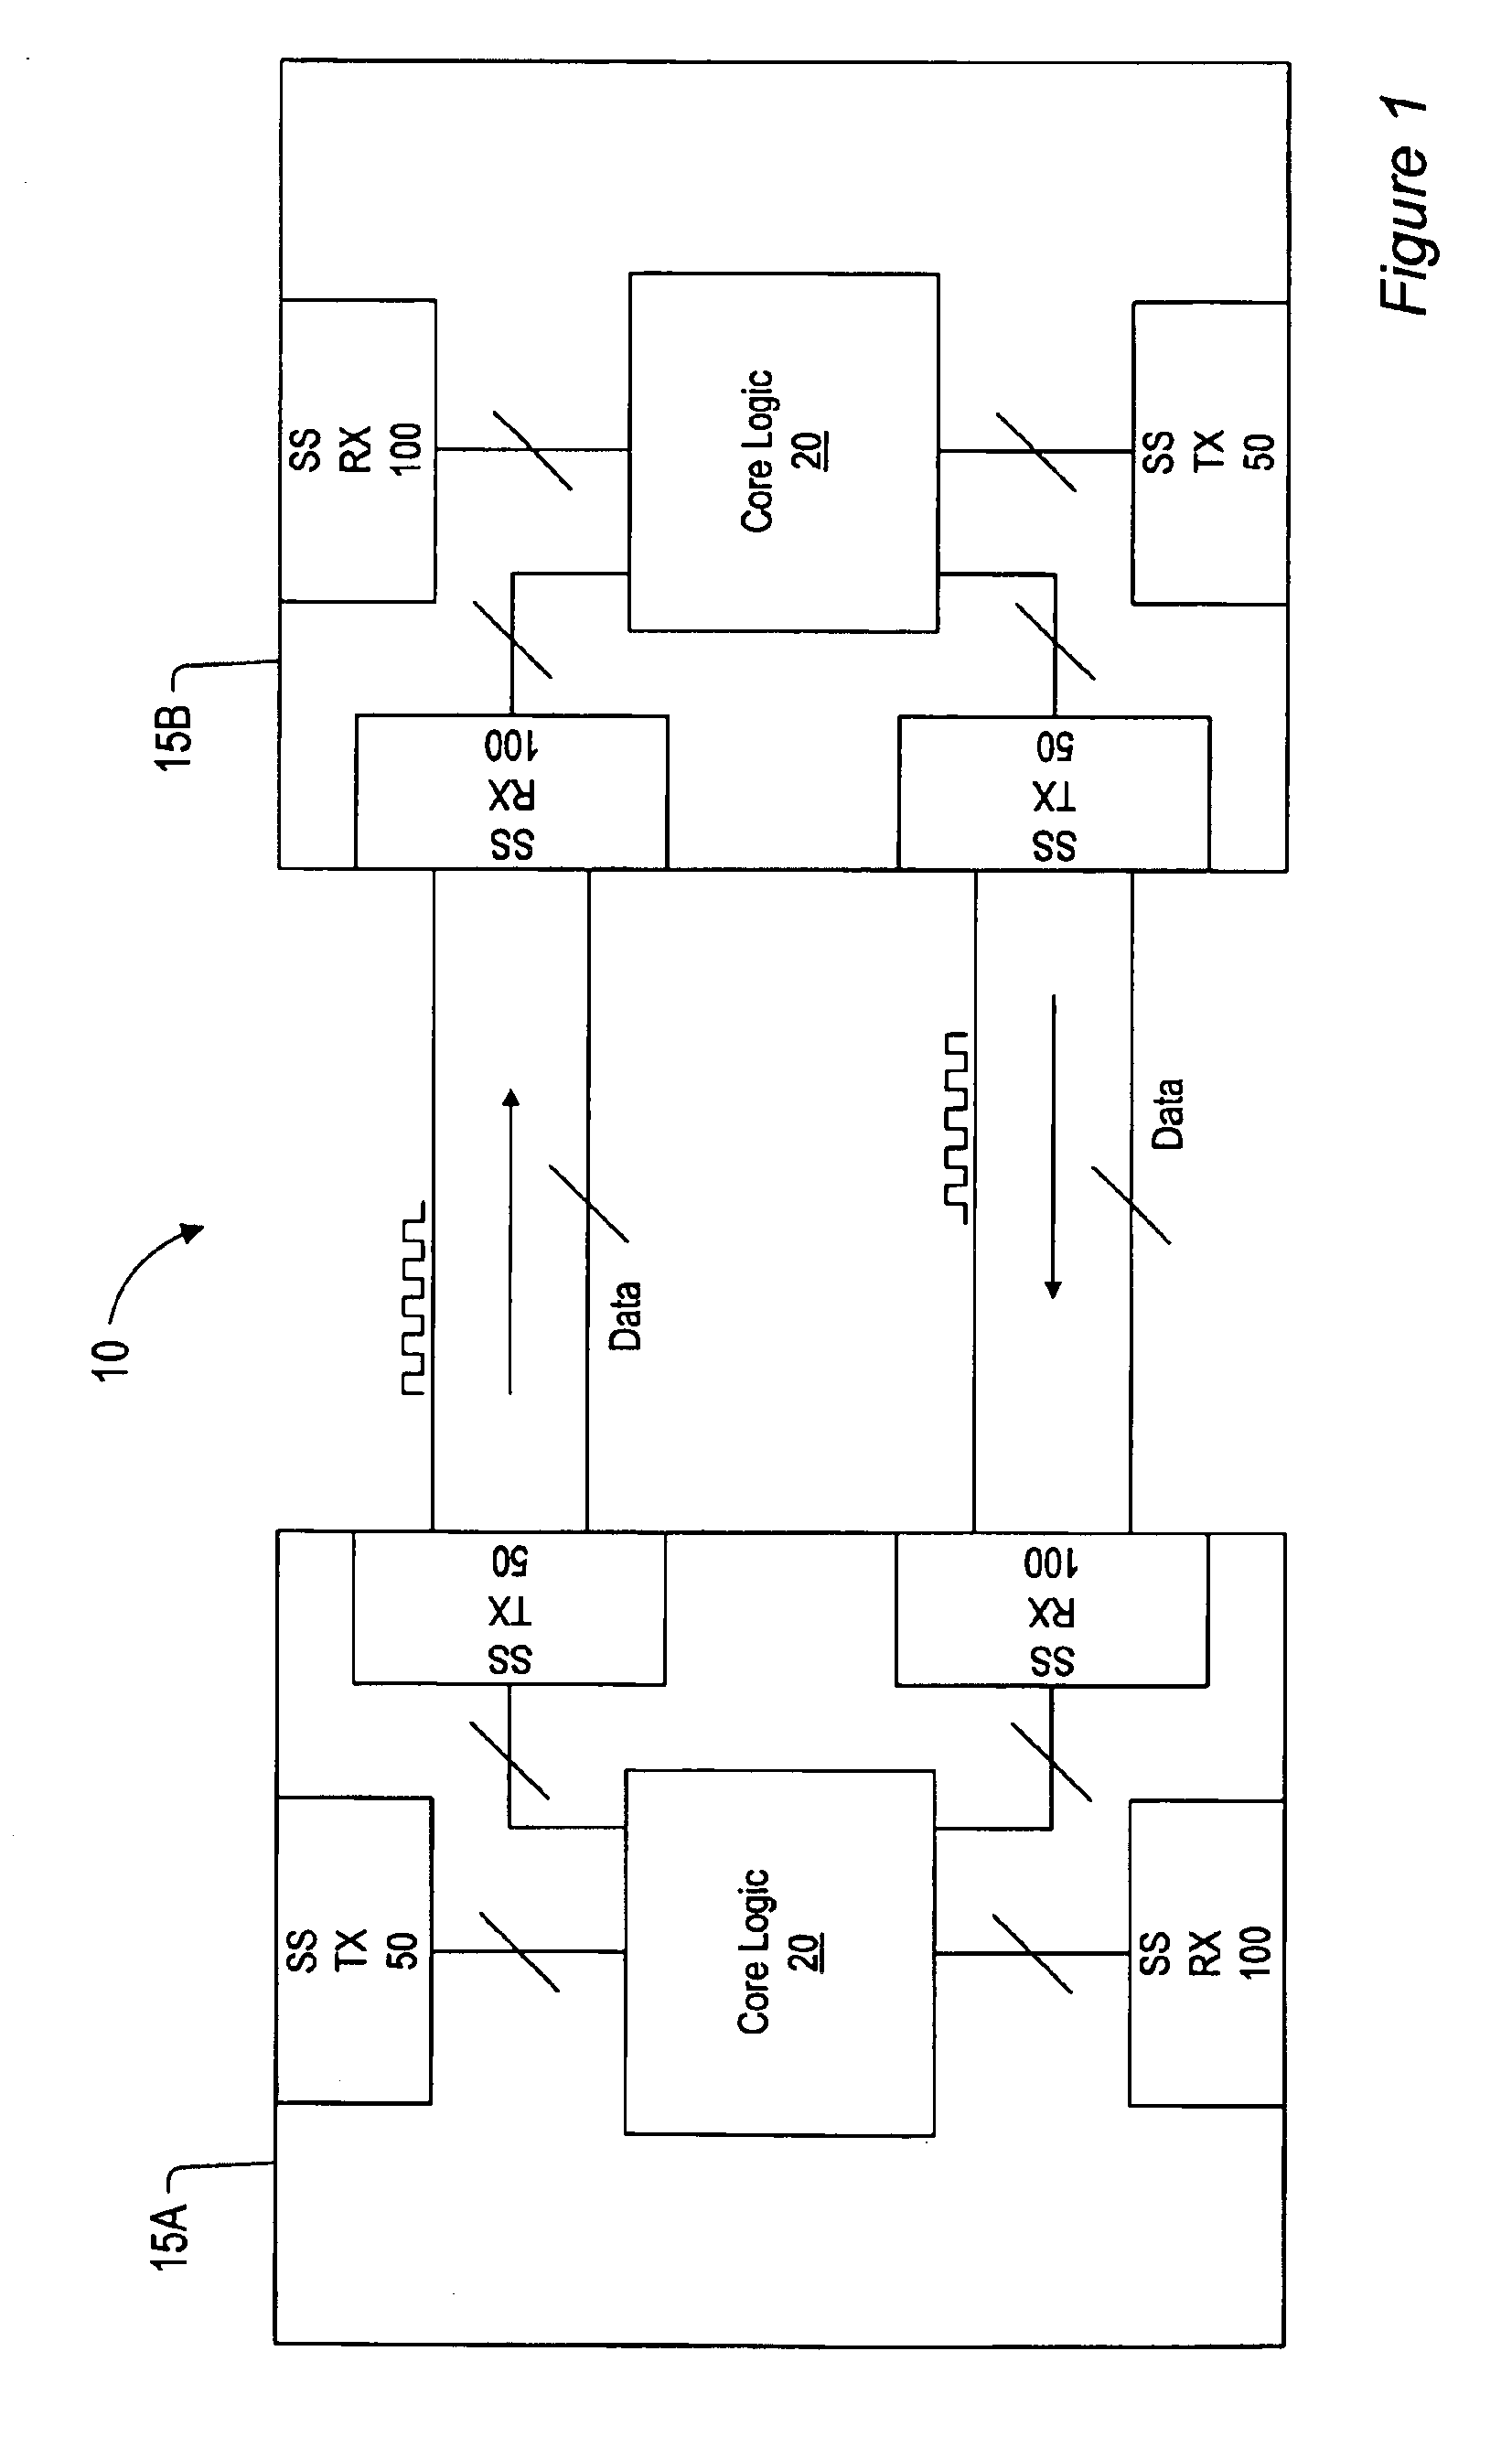 Source synchronous receiver link initialization and input floating control by clock detection and DLL lock detection